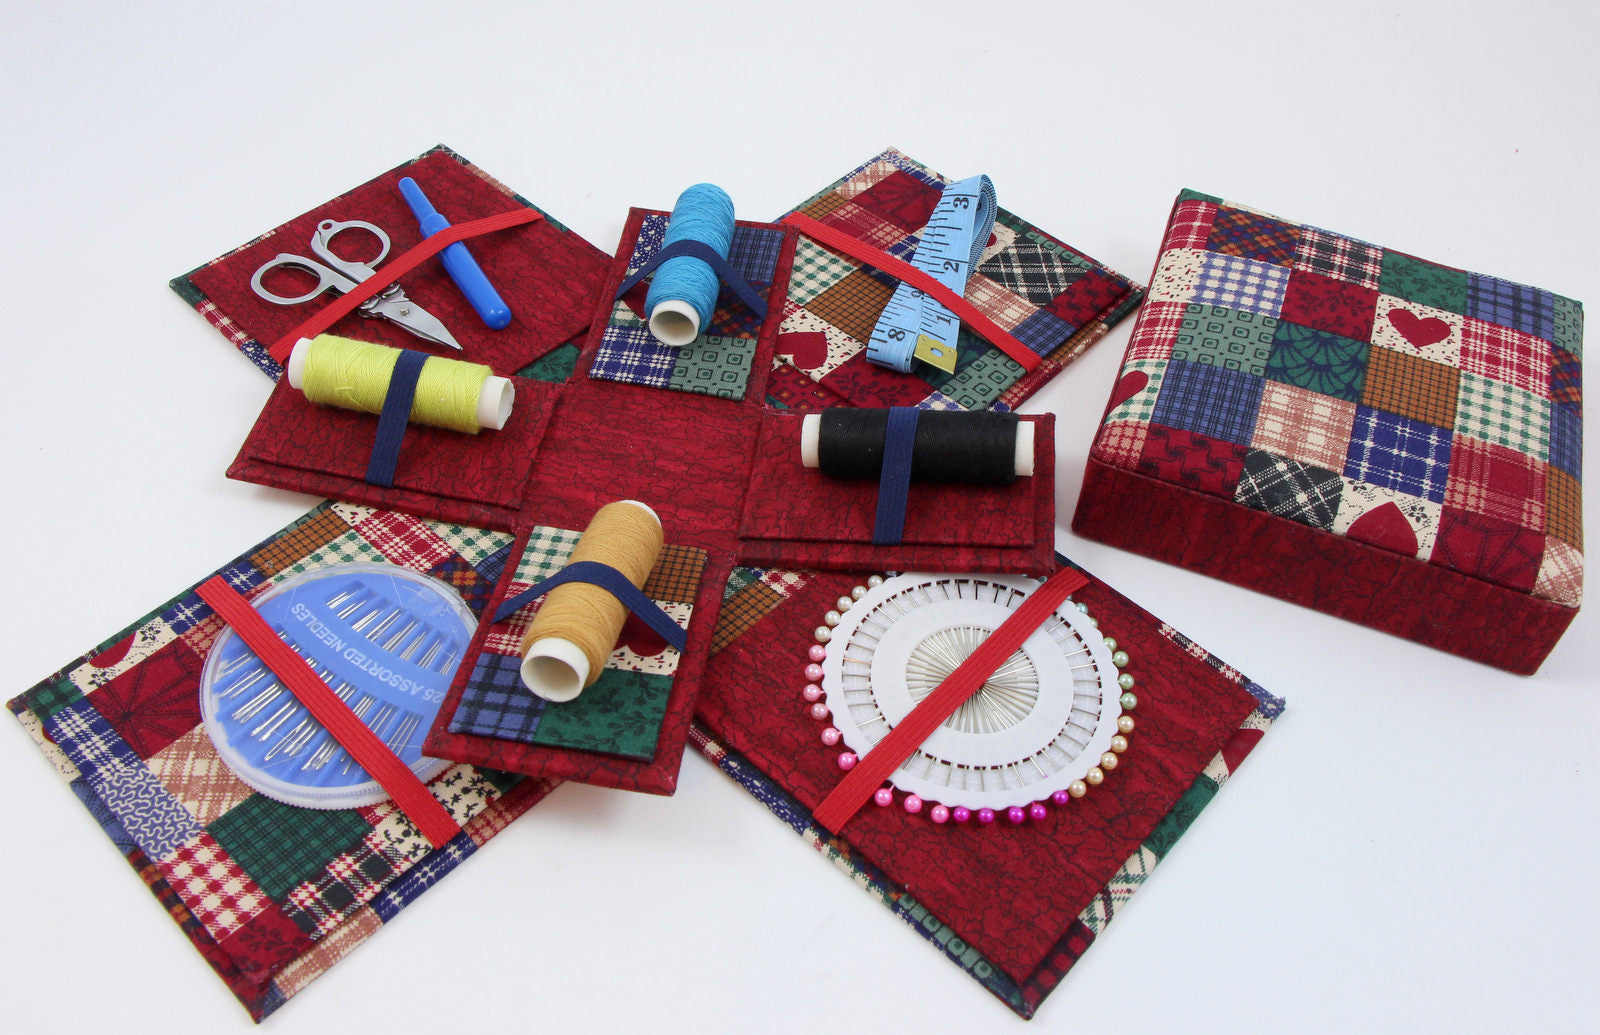 sewing-box-kit-boite-couture Fabric